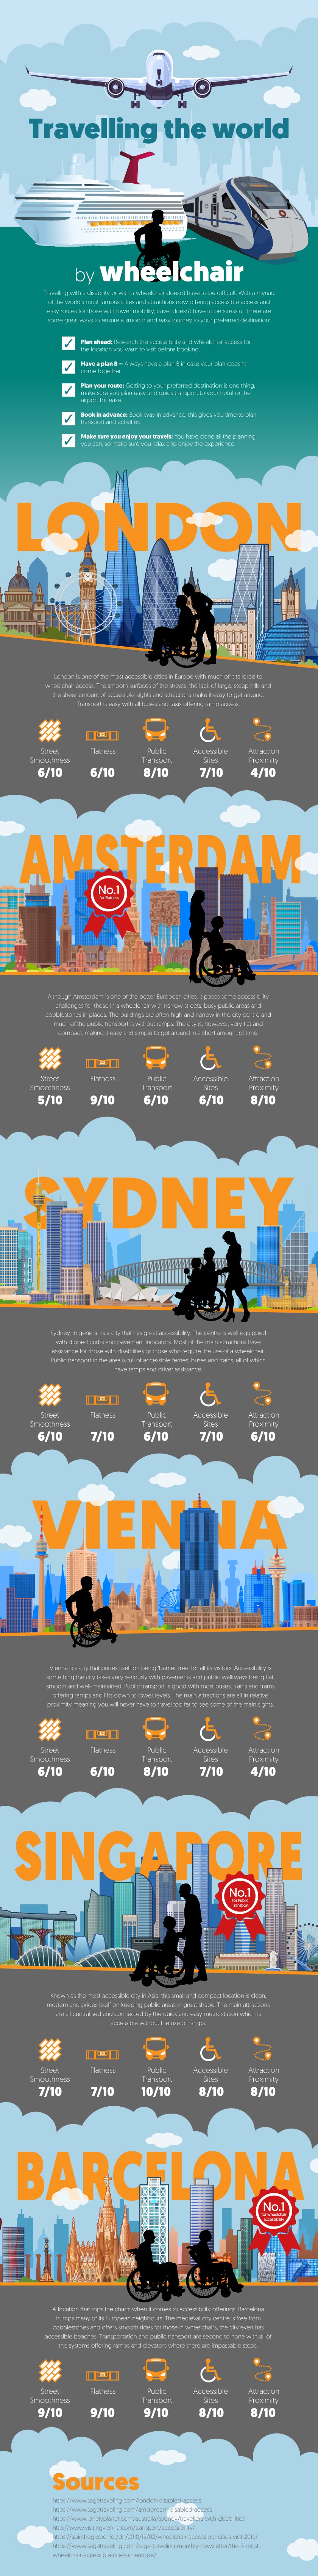 Travelling the World by Wheelchair #infographic